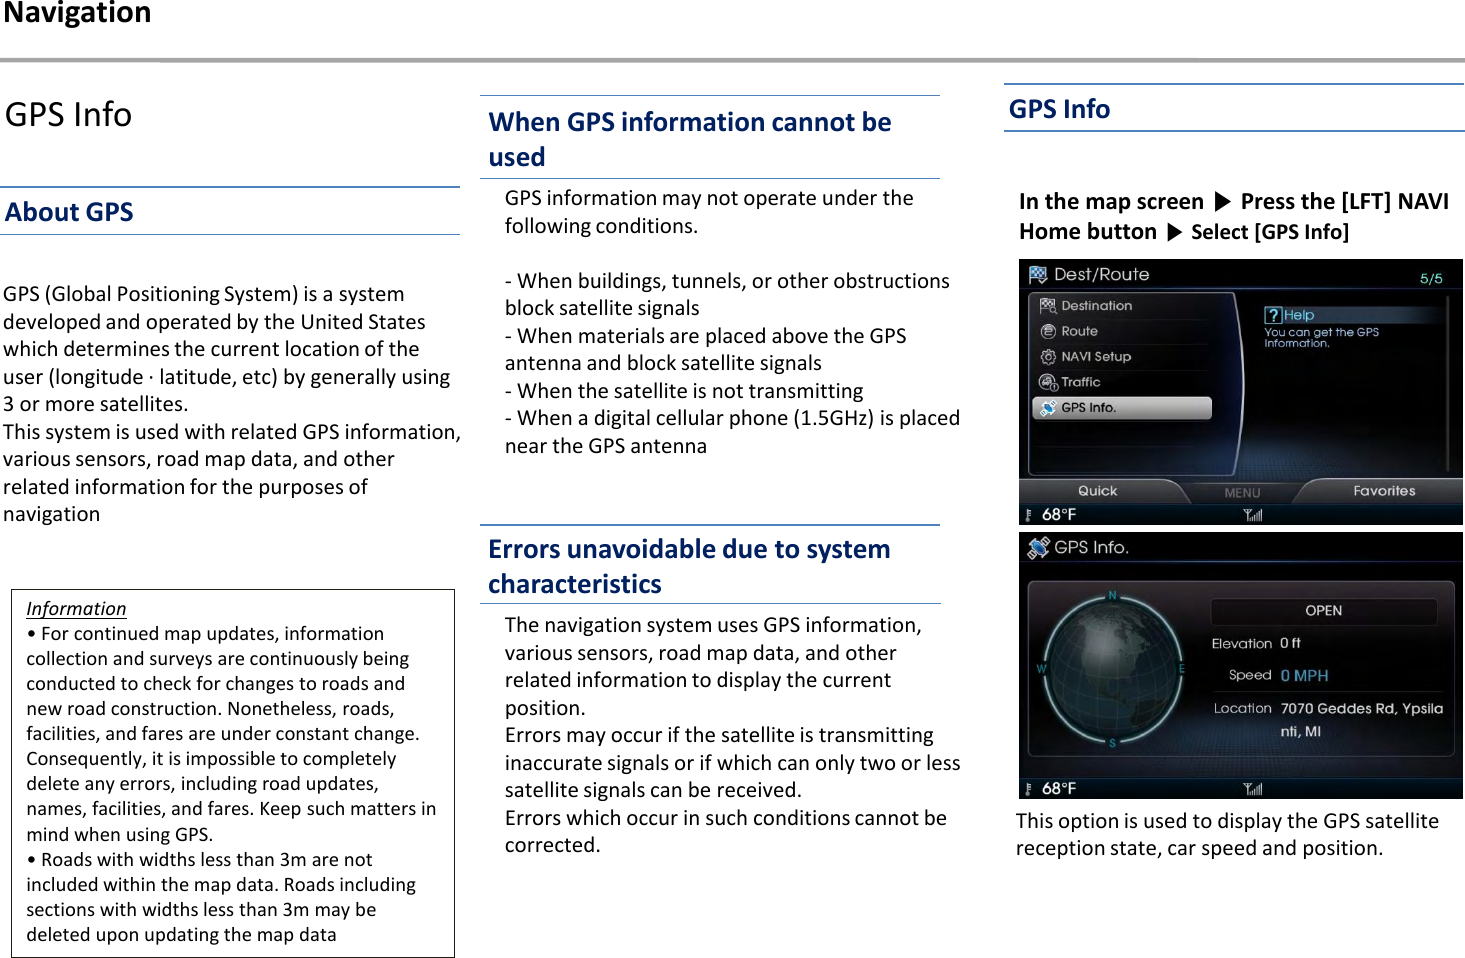 GPS InfoGPS information may not operate under the following conditions. - When buildings, tunnels, or other obstructions block satellite signals - When materials are placed above the GPS antenna and block satellite signals - When the satellite is not transmitting - When a digital cellular phone (1.5GHz) is placed near the GPS antennaThe navigation system uses GPS information, various sensors, road map data, and other related information to display the current position. Errors may occur if the satellite is transmitting inaccurate signals or if which can only two or less satellite signals can be received. Errors which occur in such conditions cannot be corrected.GPS (Global Positioning System) is a system developed and operated by the United States which determines the current location of the user (longitude · latitude, etc) by generally using 3 or more satellites. This system is used with related GPS information, various sensors, road map data, and other related information for the purposes of navigationInformation• For continued map updates, information collection and surveys are continuously being conducted to check for changes to roads and new road construction. Nonetheless, roads, facilities, and fares are under constant change. Consequently, it is impossible to completely delete any errors, including road updates, names, facilities, and fares. Keep such matters in mind when using GPS. • Roads with widths less than 3m are not included within the map data. Roads including sections with widths less than 3m may be deleted upon updating the map dataIn the map screen ▶Press the [LFT] NAVI Home button ▶Select [GPS Info] This option is used to display the GPS satellite reception state, car speed and position.NavigationWhen GPS information cannot be usedAbout GPSGPS InfoErrors unavoidable due to system characteristics